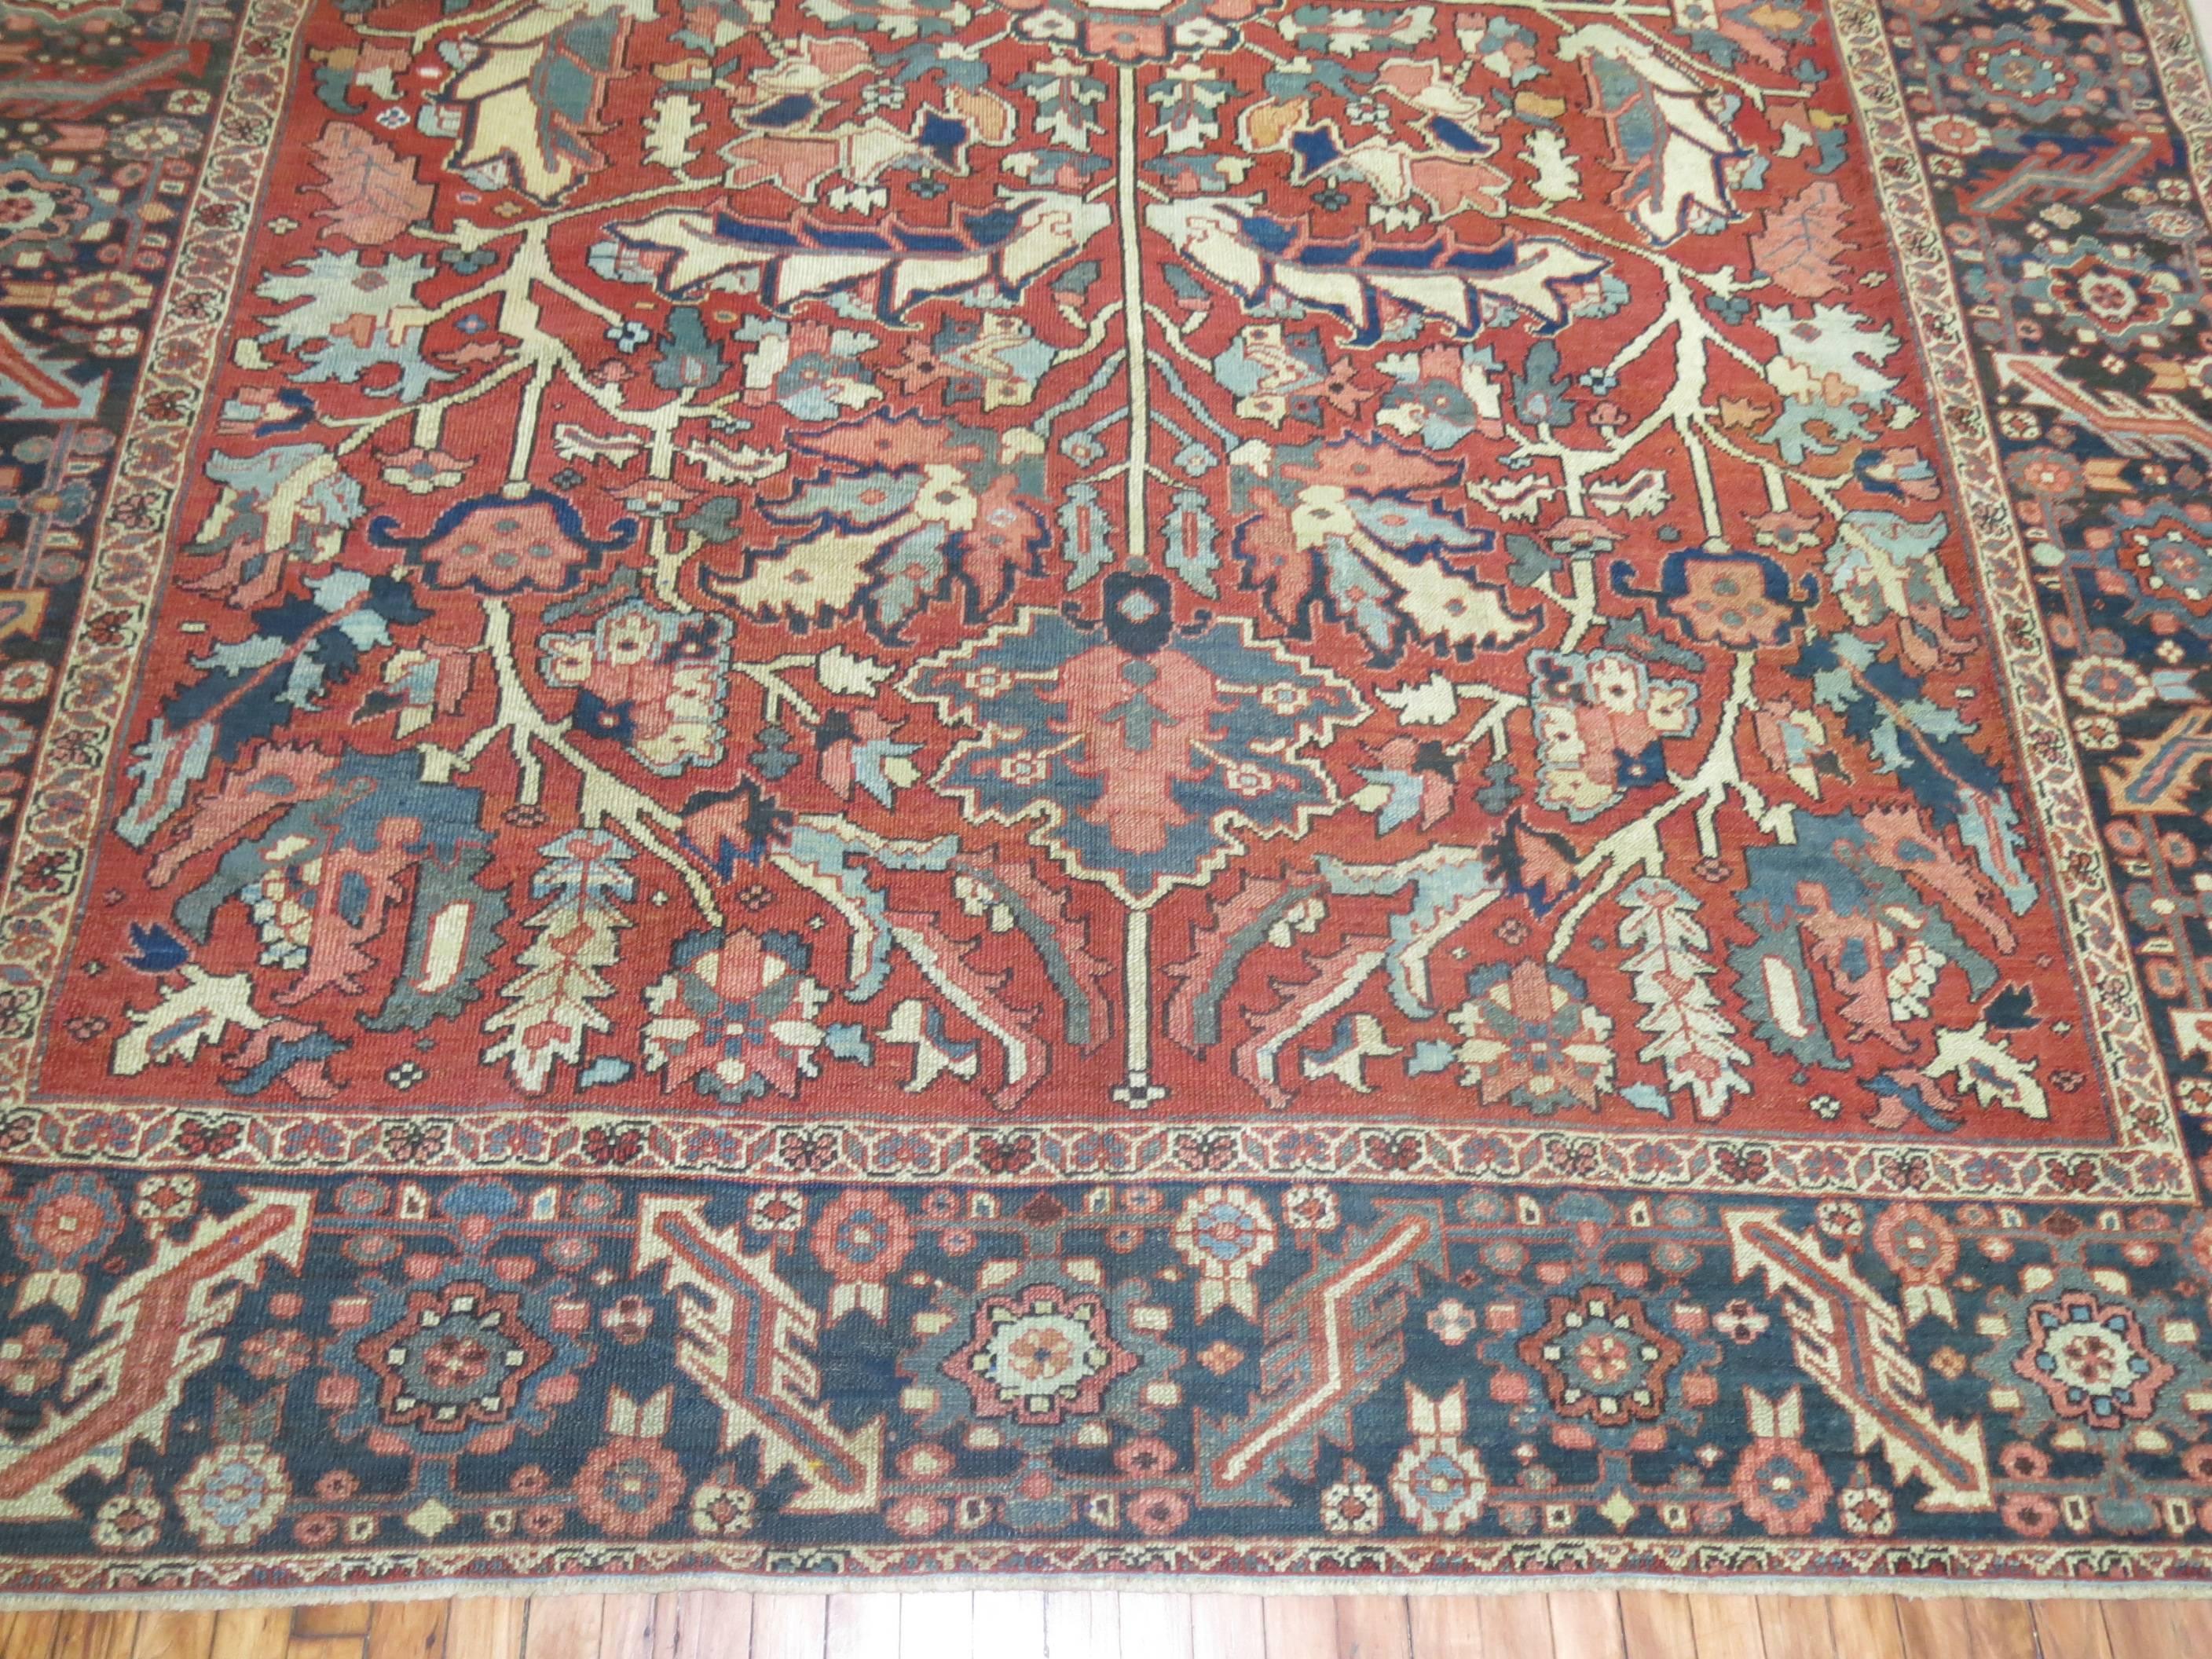 Authentic room size persian heriz rug.

9'6'' x 12'2''

The virtues of the antique Heriz carpets are found in their design style and color. The signature of a Heriz is the large medallion with overscale cornerpieces filled with angular oak leaves